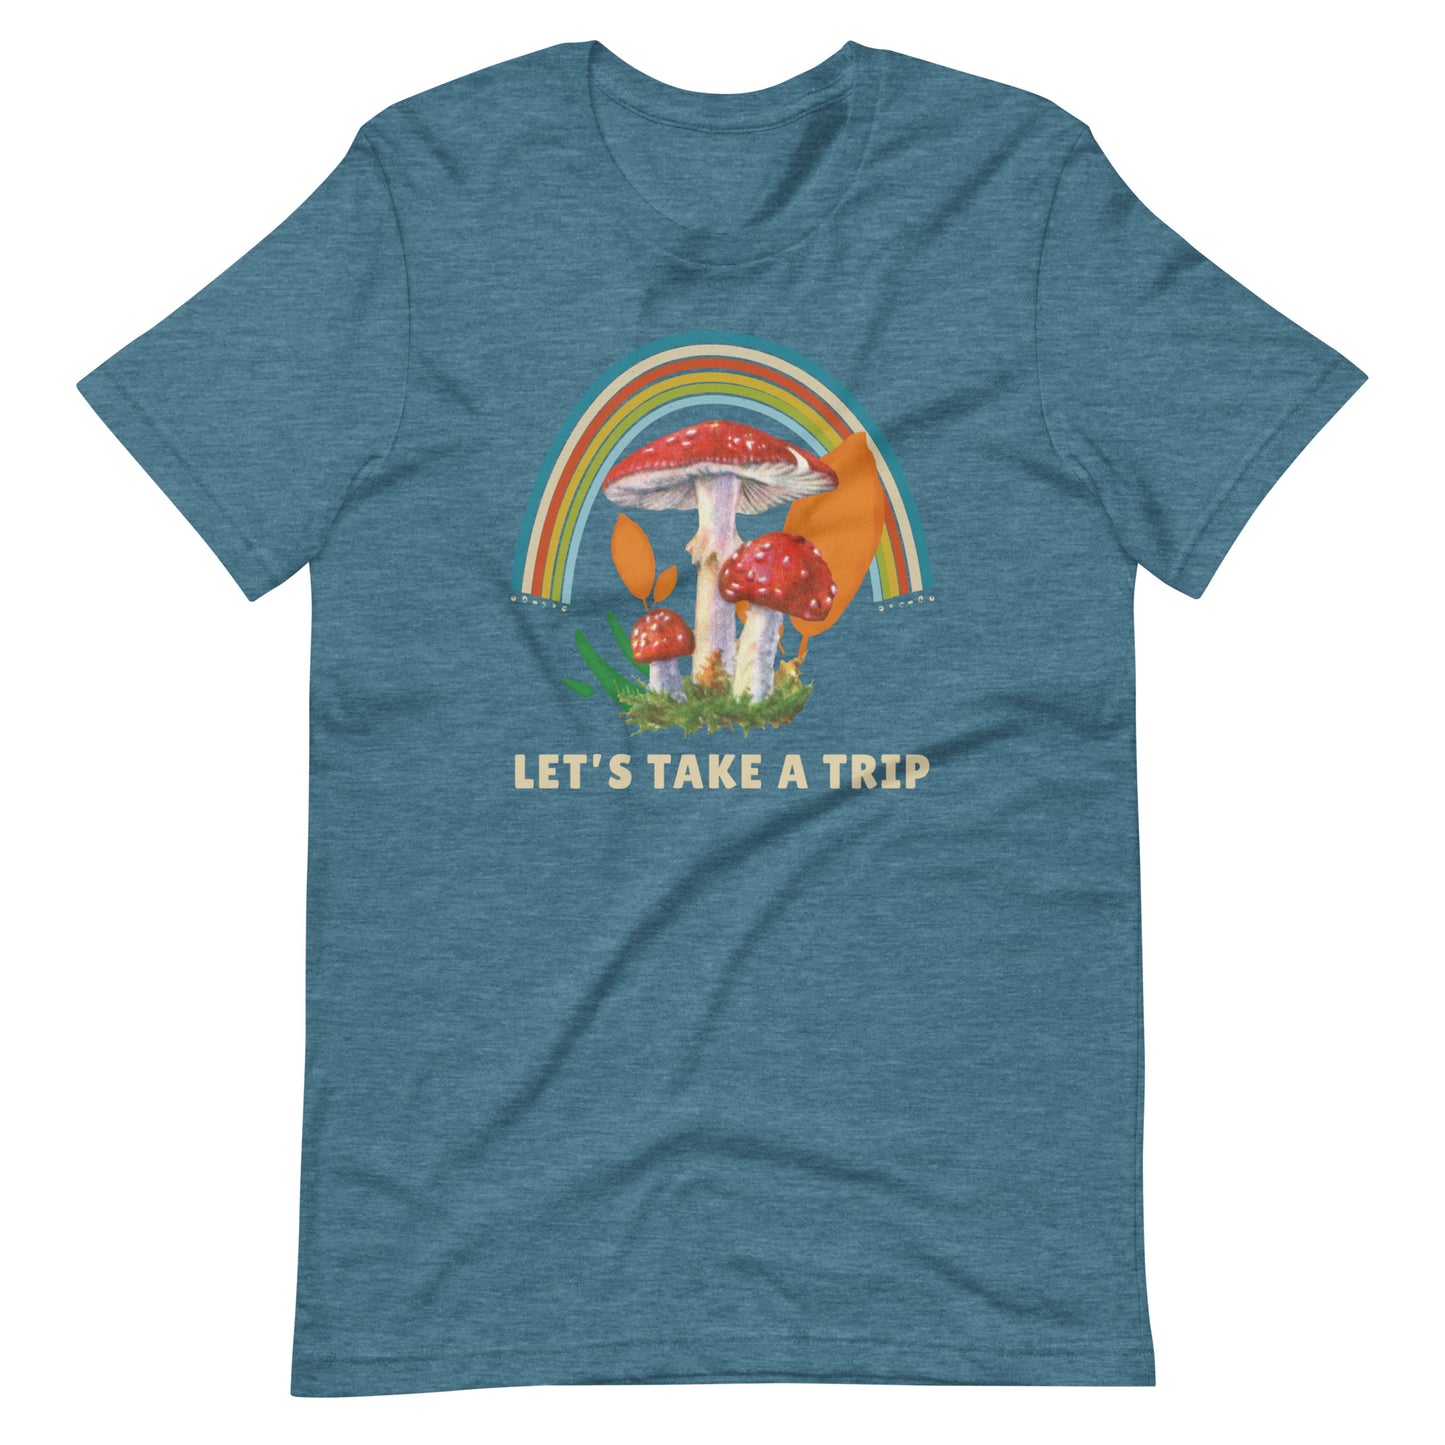 Let's Take a Trip Magic Mushroom T-Shirt - Embrace the Psychedelic Adventure